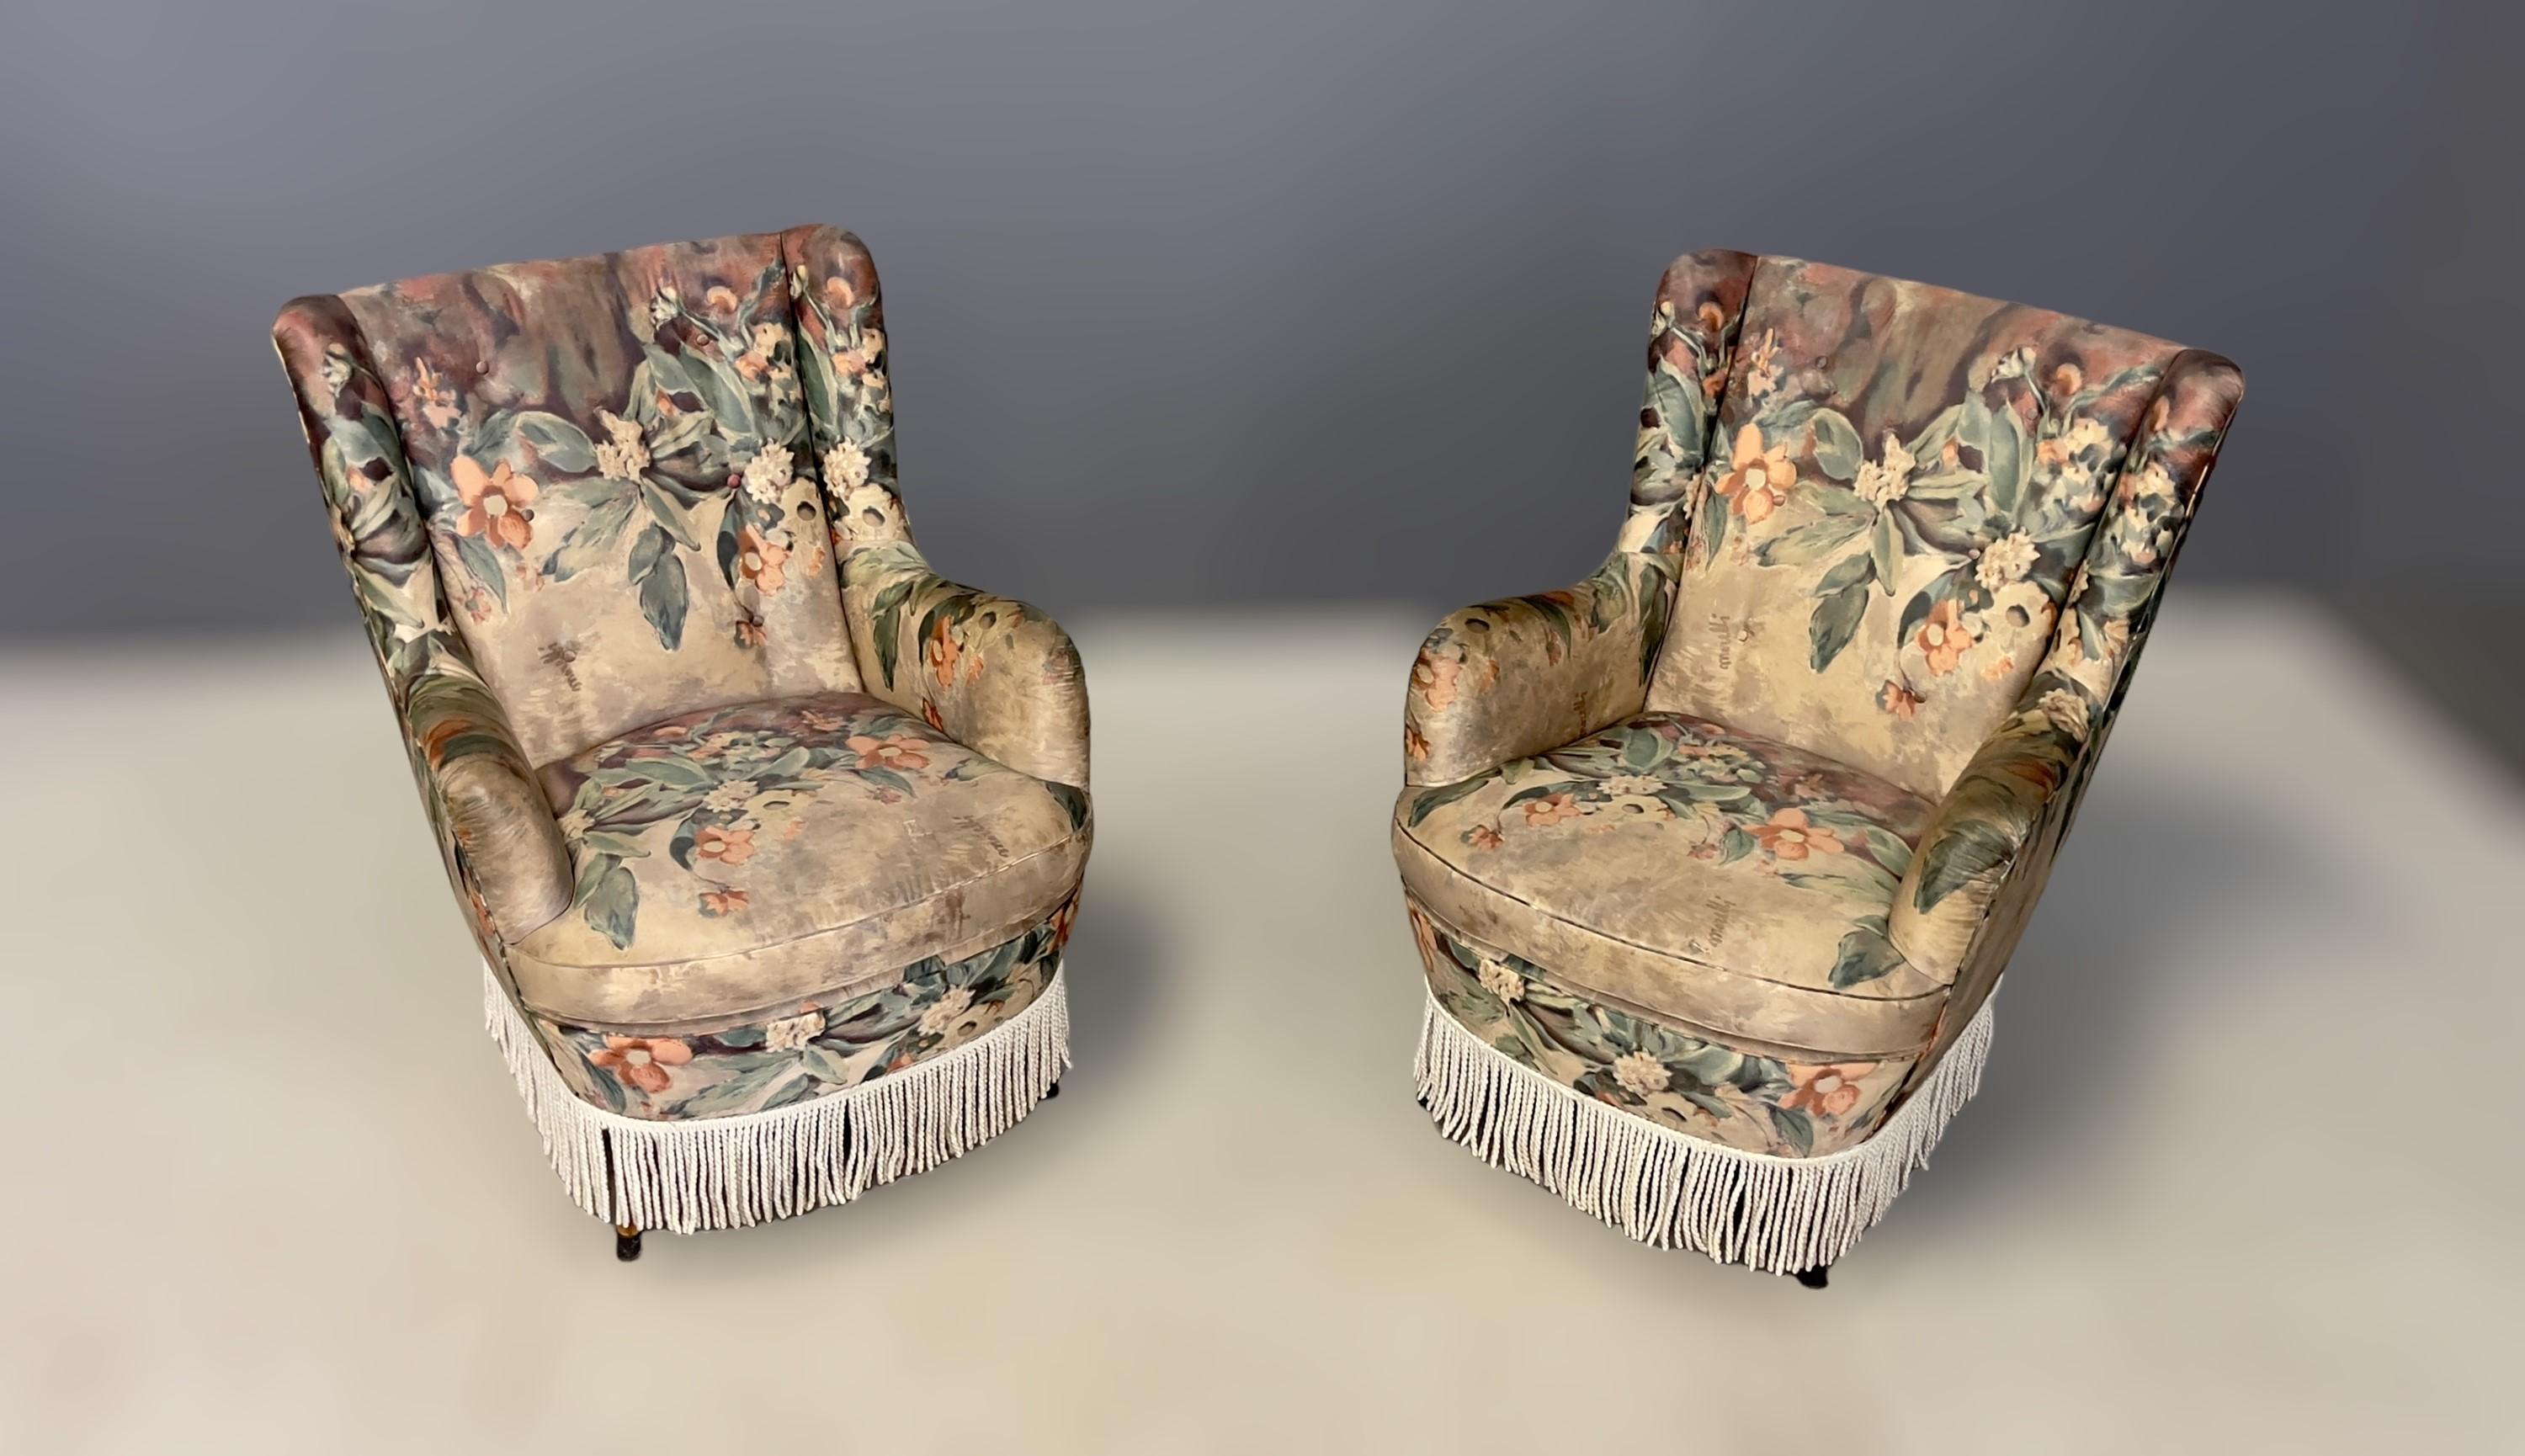 Pair of armchairs with wooden feet and original fabric upholstery of the period. Italian manufacture. C1950s